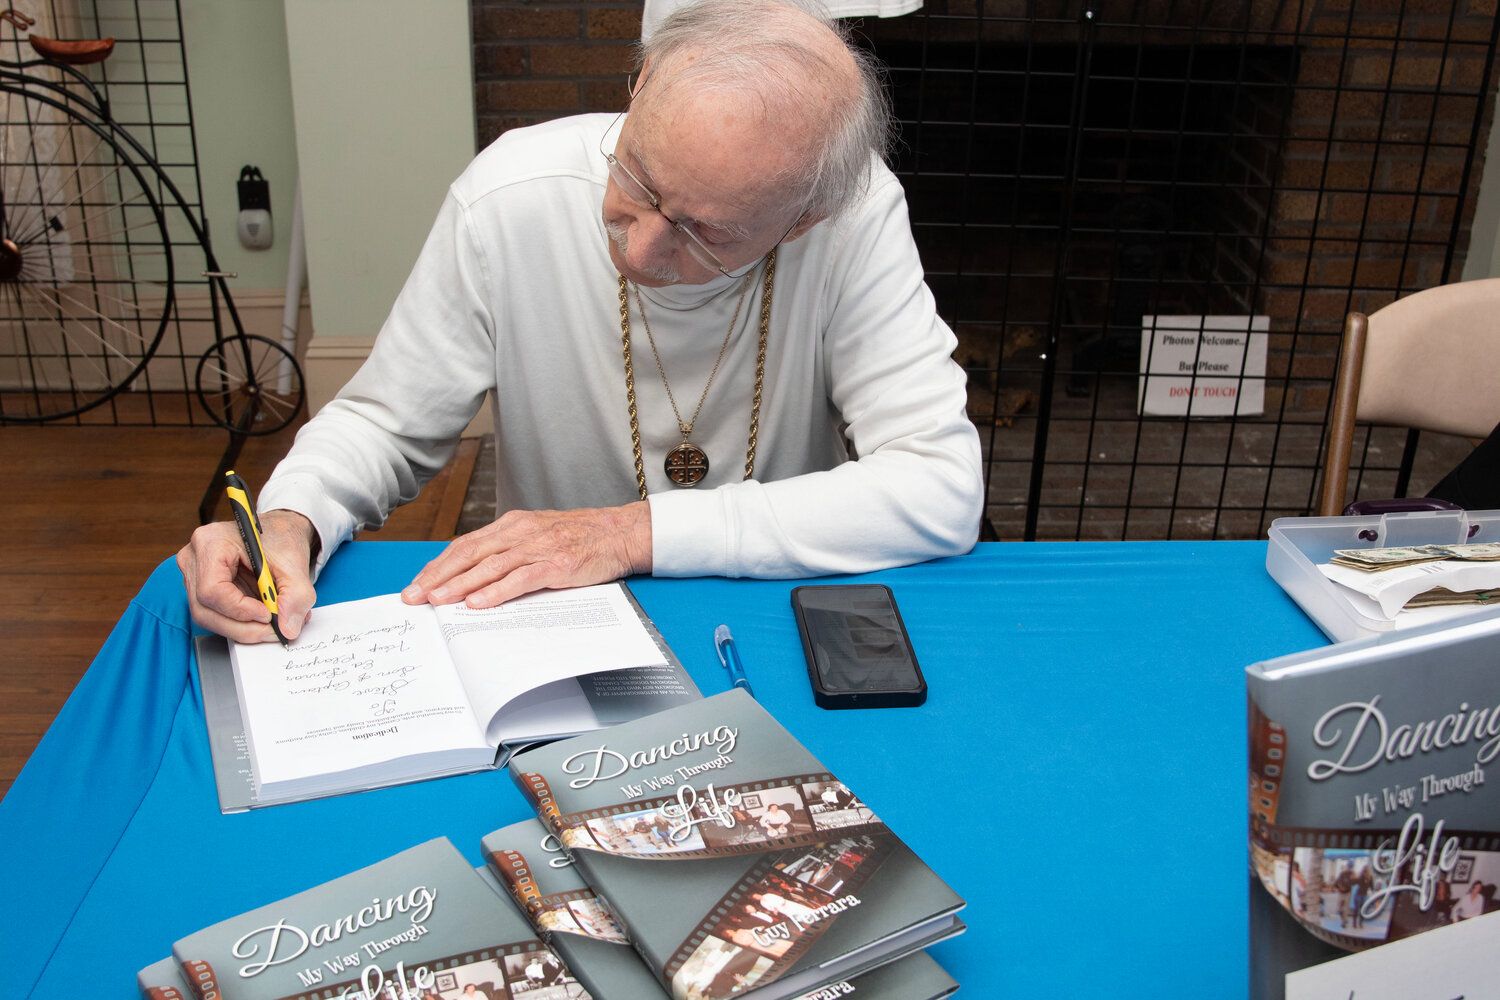 Village icon Gaetano ‘Guy’ Ferrara hosted a book signing of his autobiography, ‘Dancing My Way Through Life,’ at the Pagan-Fletcher Restoration on May 21.